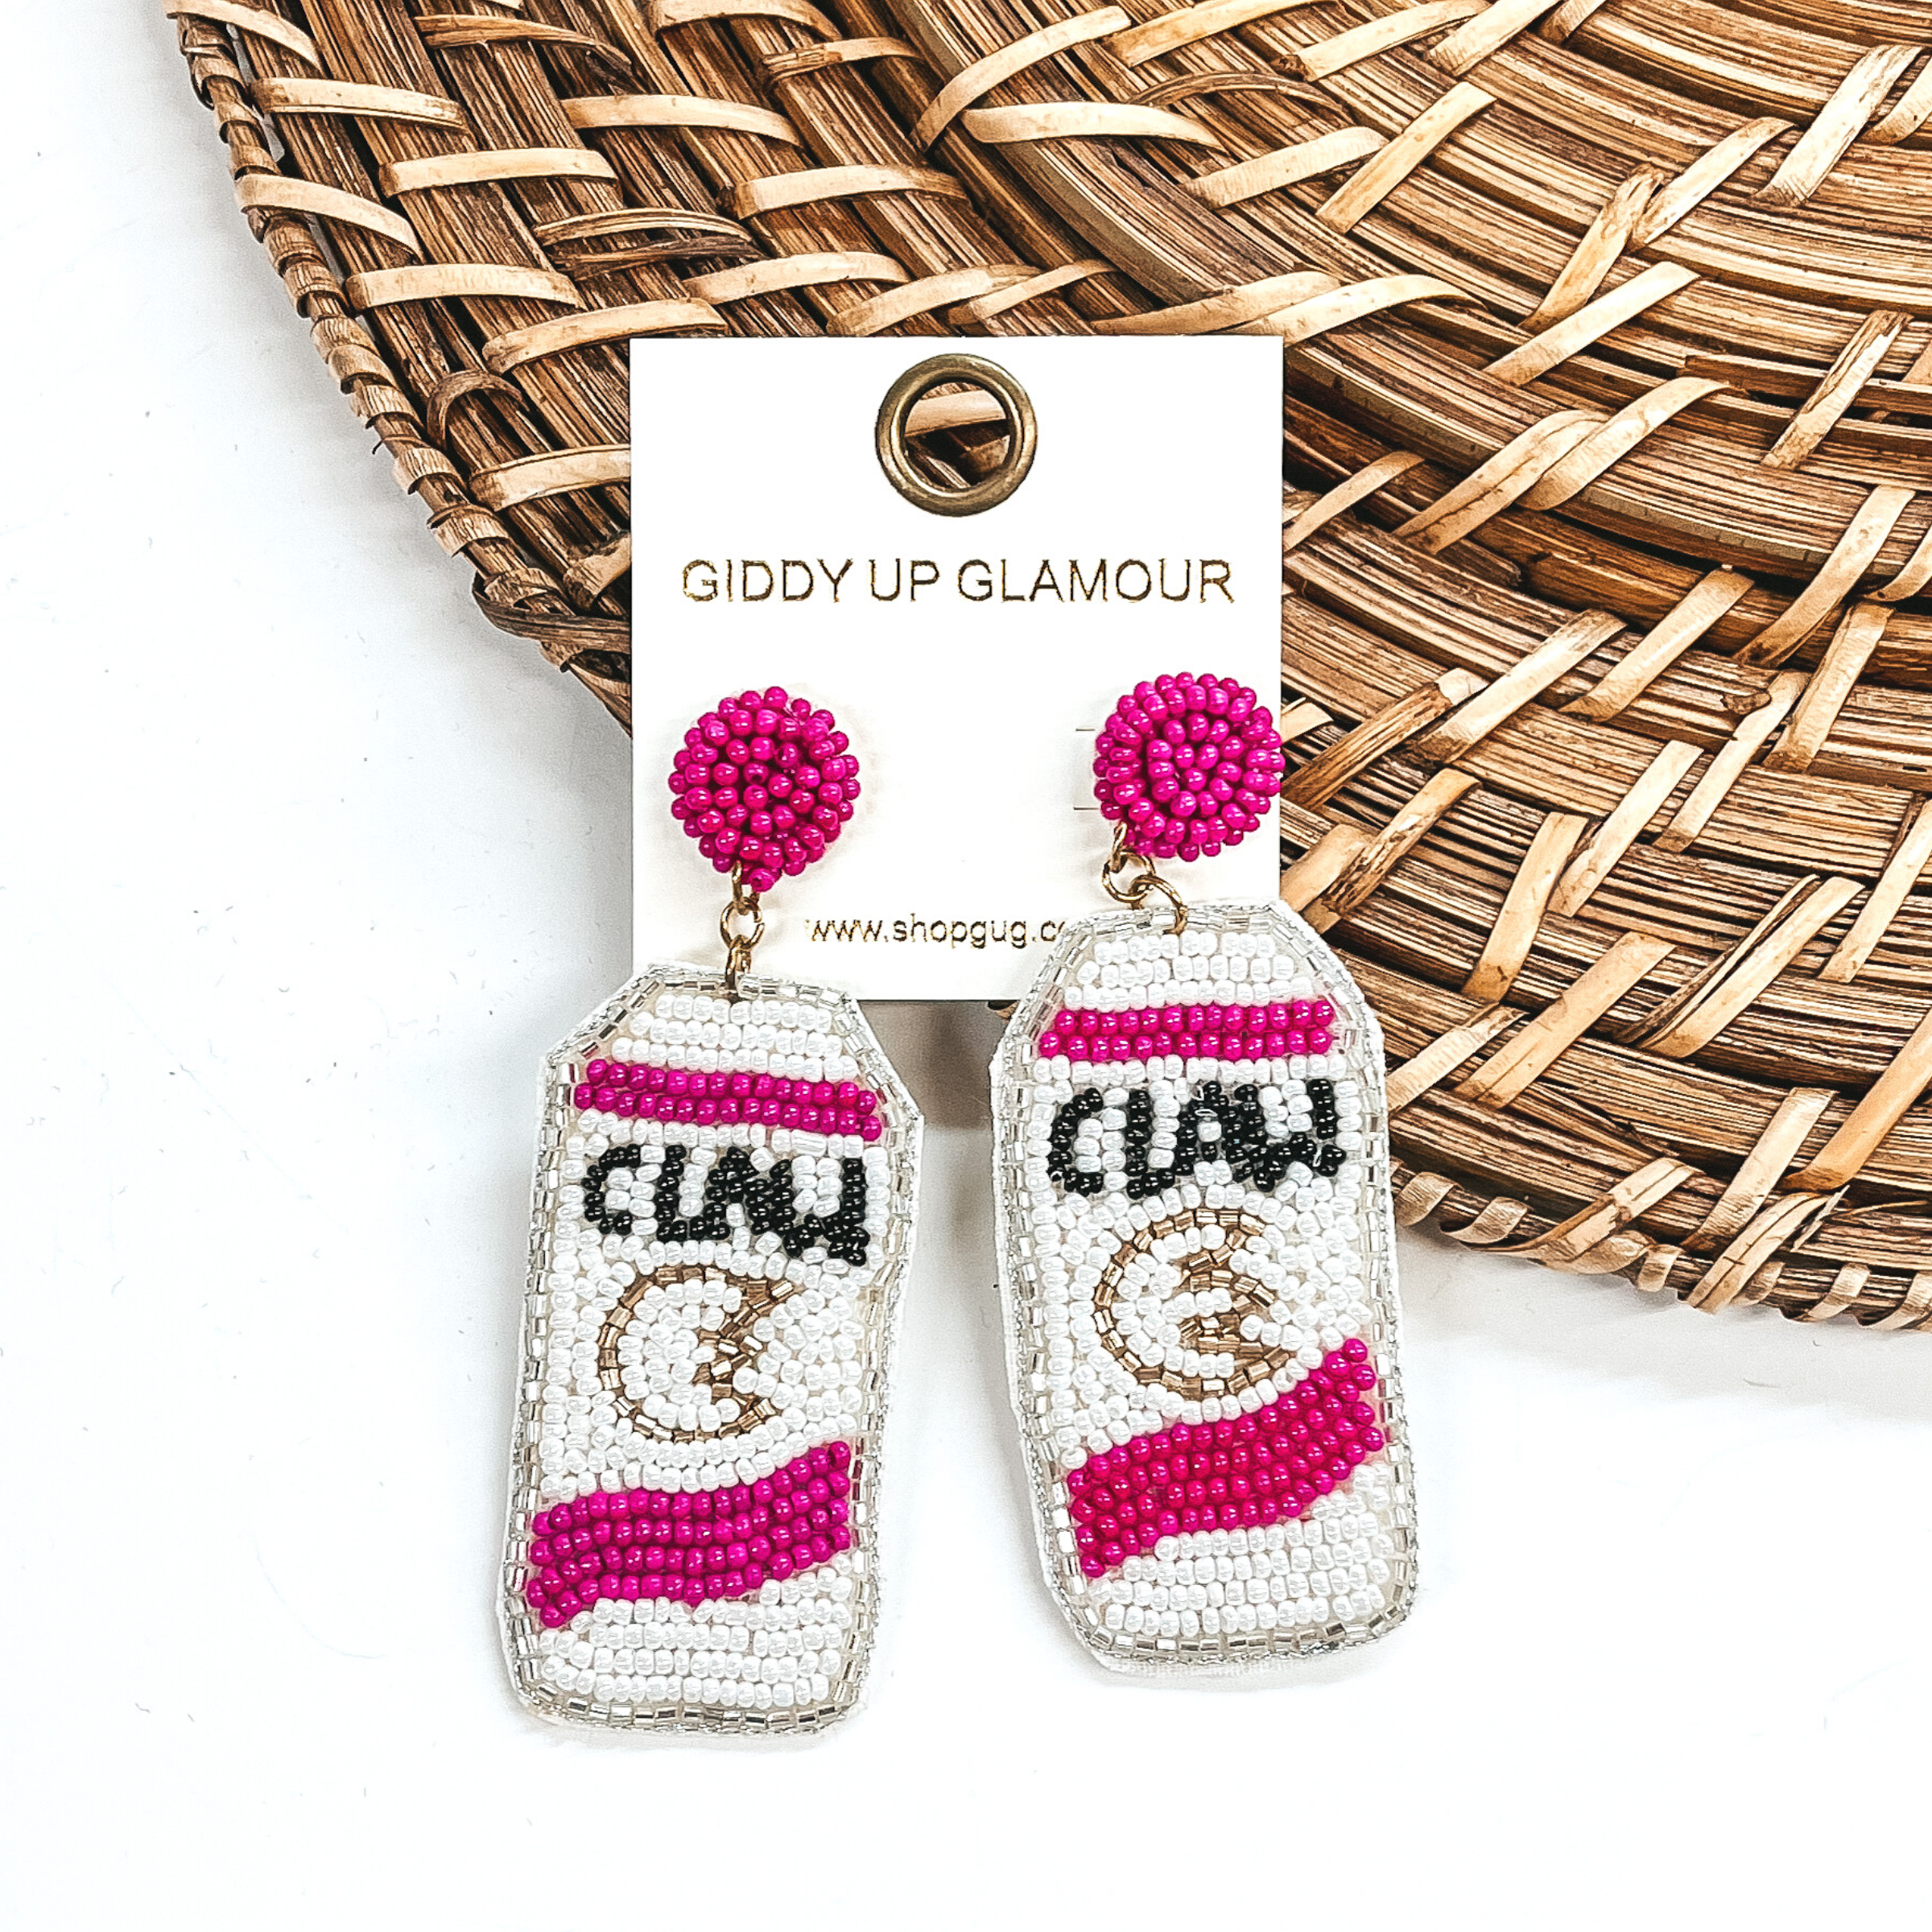 White beaded can earrings with pink accents that look like White Claw cans. These earrings are pictured laying partially on a basket weave material on a white background.